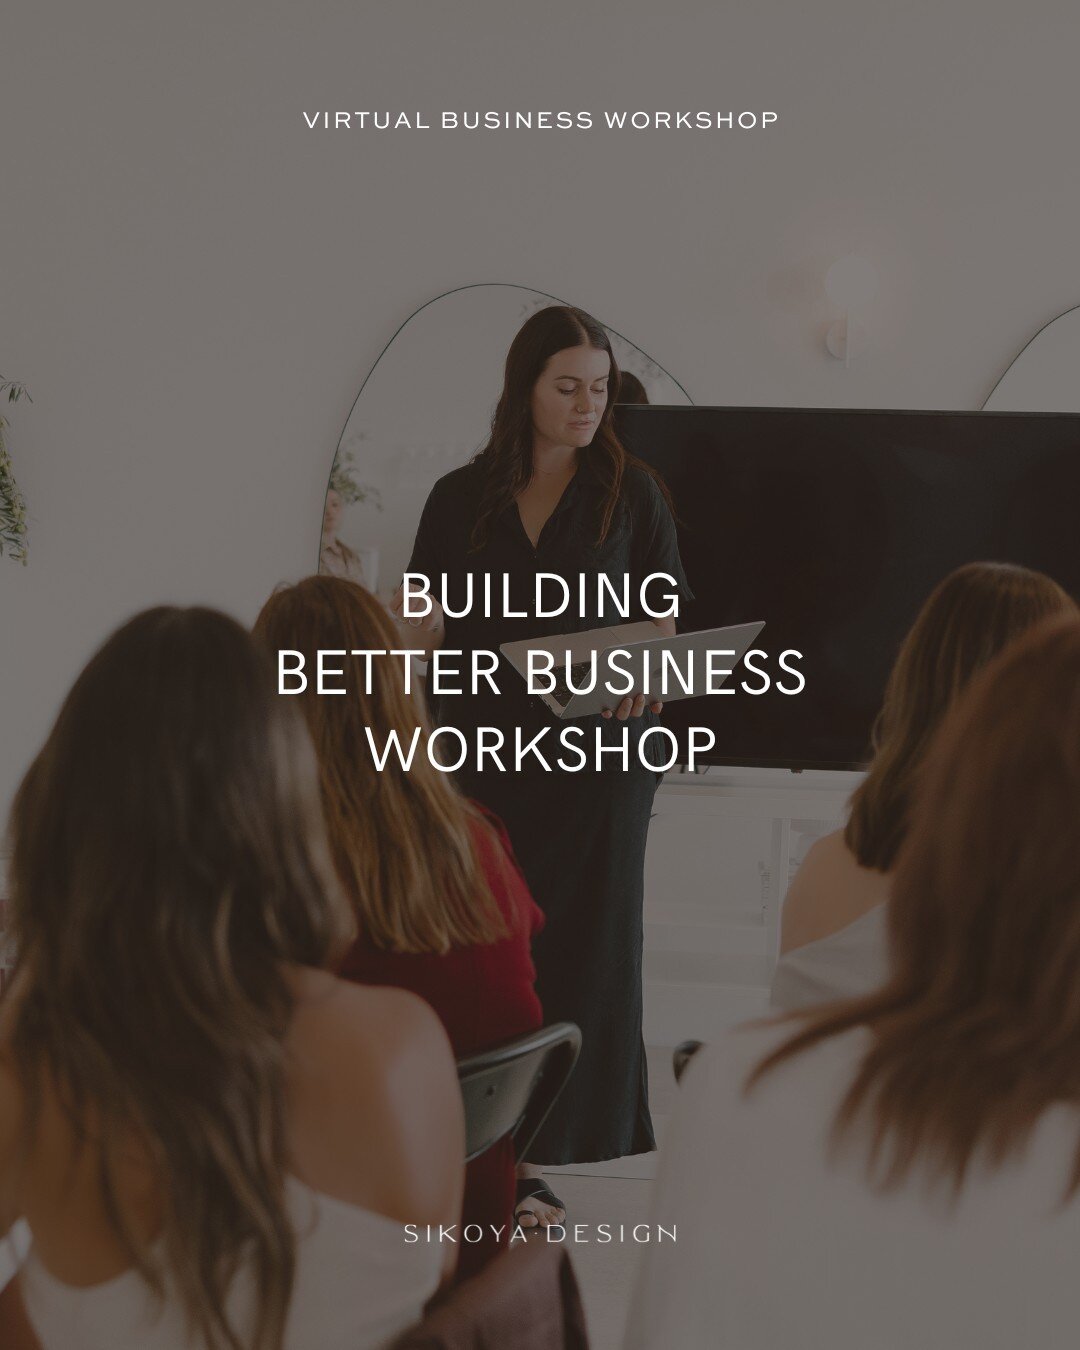 After great success, we are hosting a virtual Building Better Business Workshop!⁠
⁠
This is where you'll gain the essential knowledge to grow your business. Let founder Siquoia guide you with relatable tips and insights, helping you establish a stron